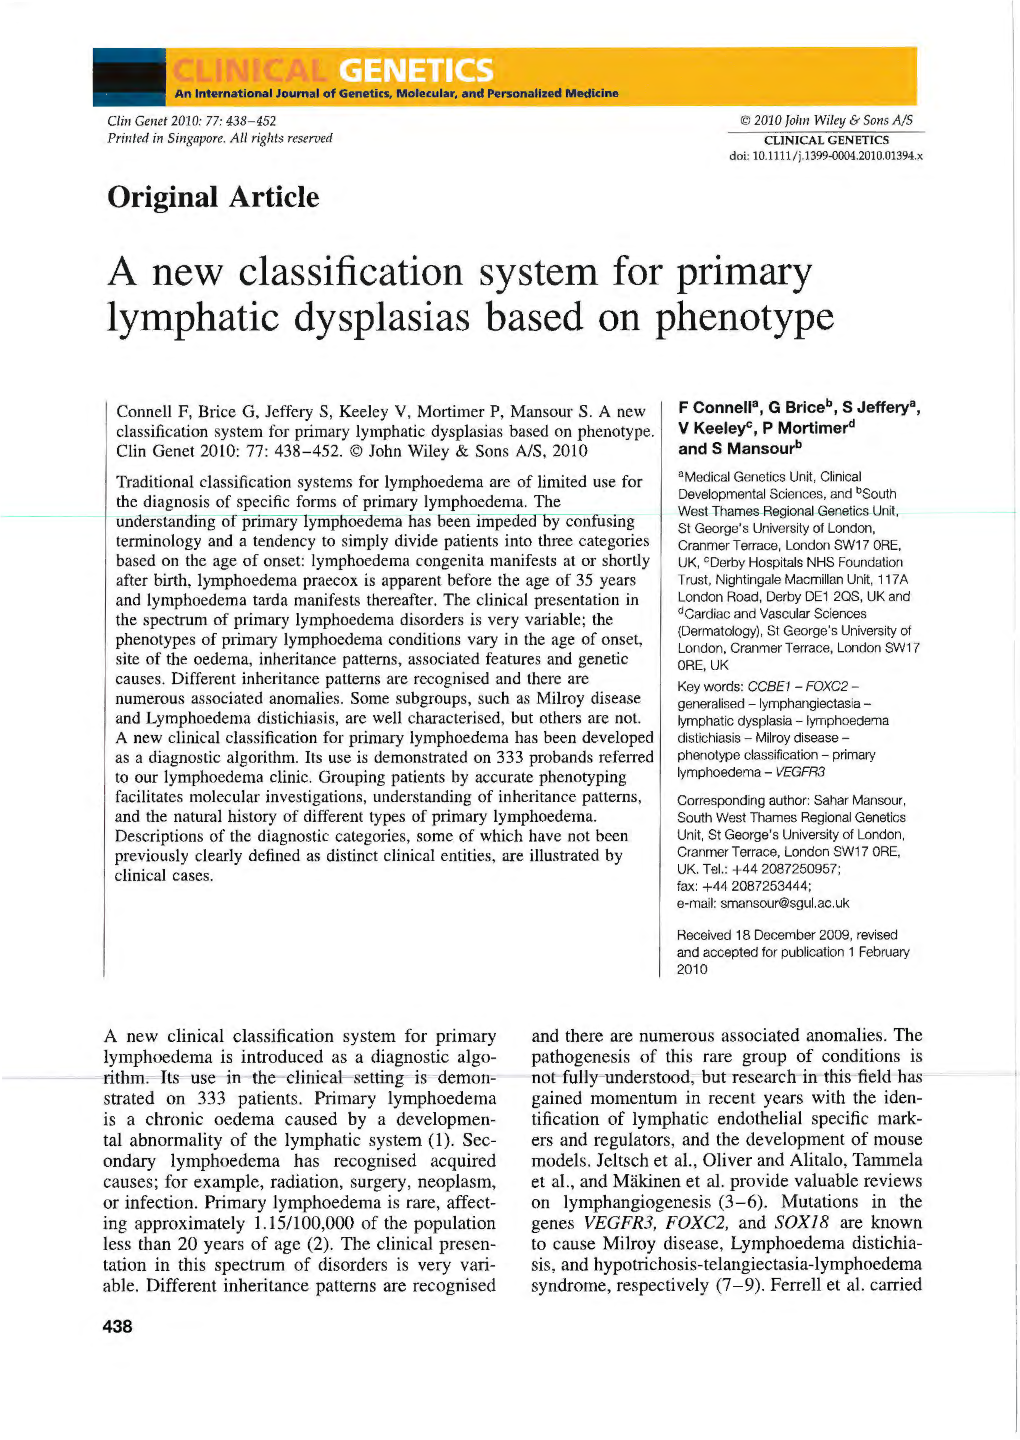 A New Classification System for Primary Lymphatic Dysplasias Based on Phenotype